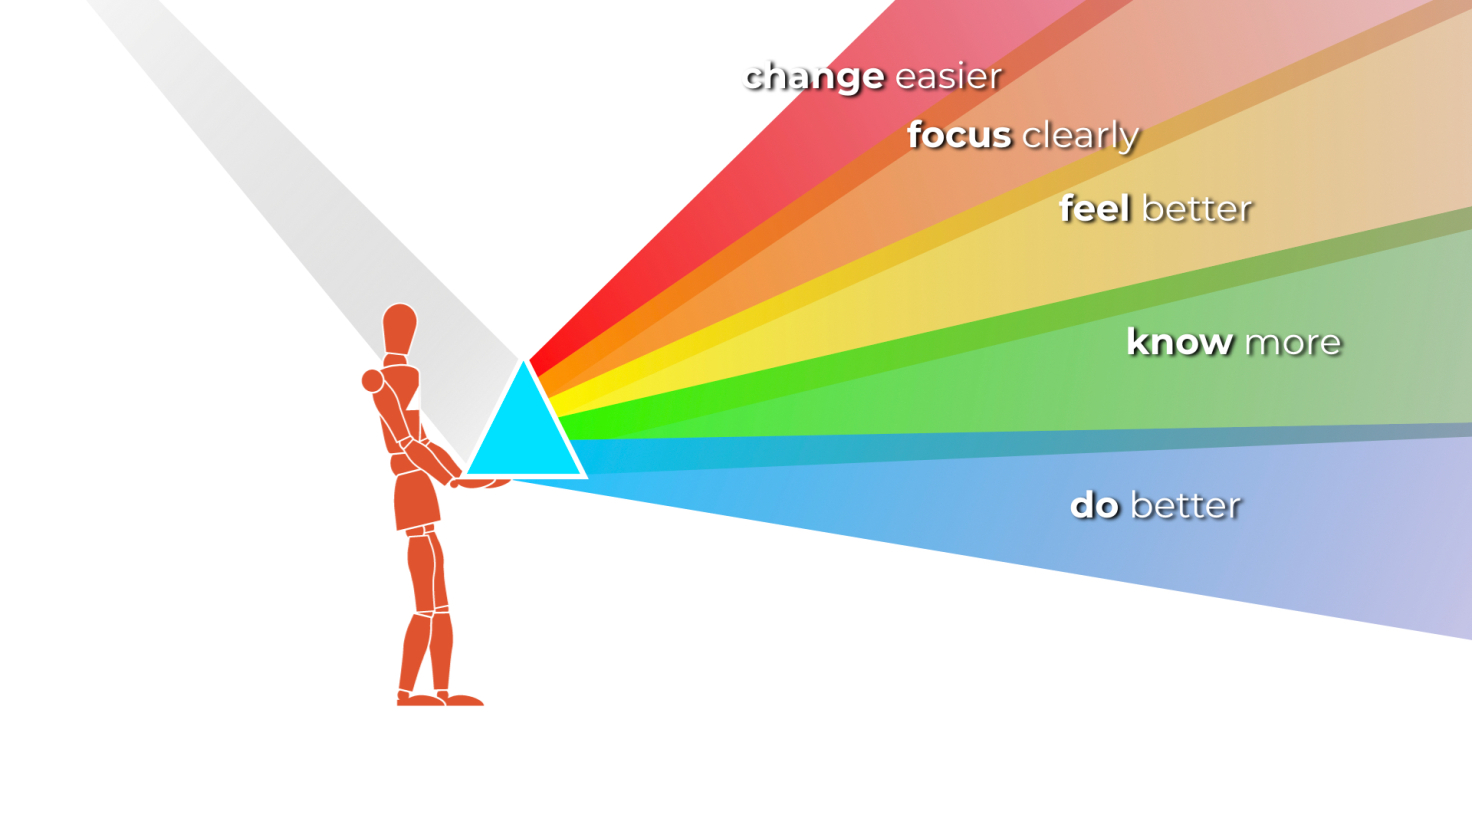 An illustration of a person holding a prism with light going in and a rainbow emerging with these words on each of the colors: Change easier, Focus clearly, Feel better, Know more, Do better